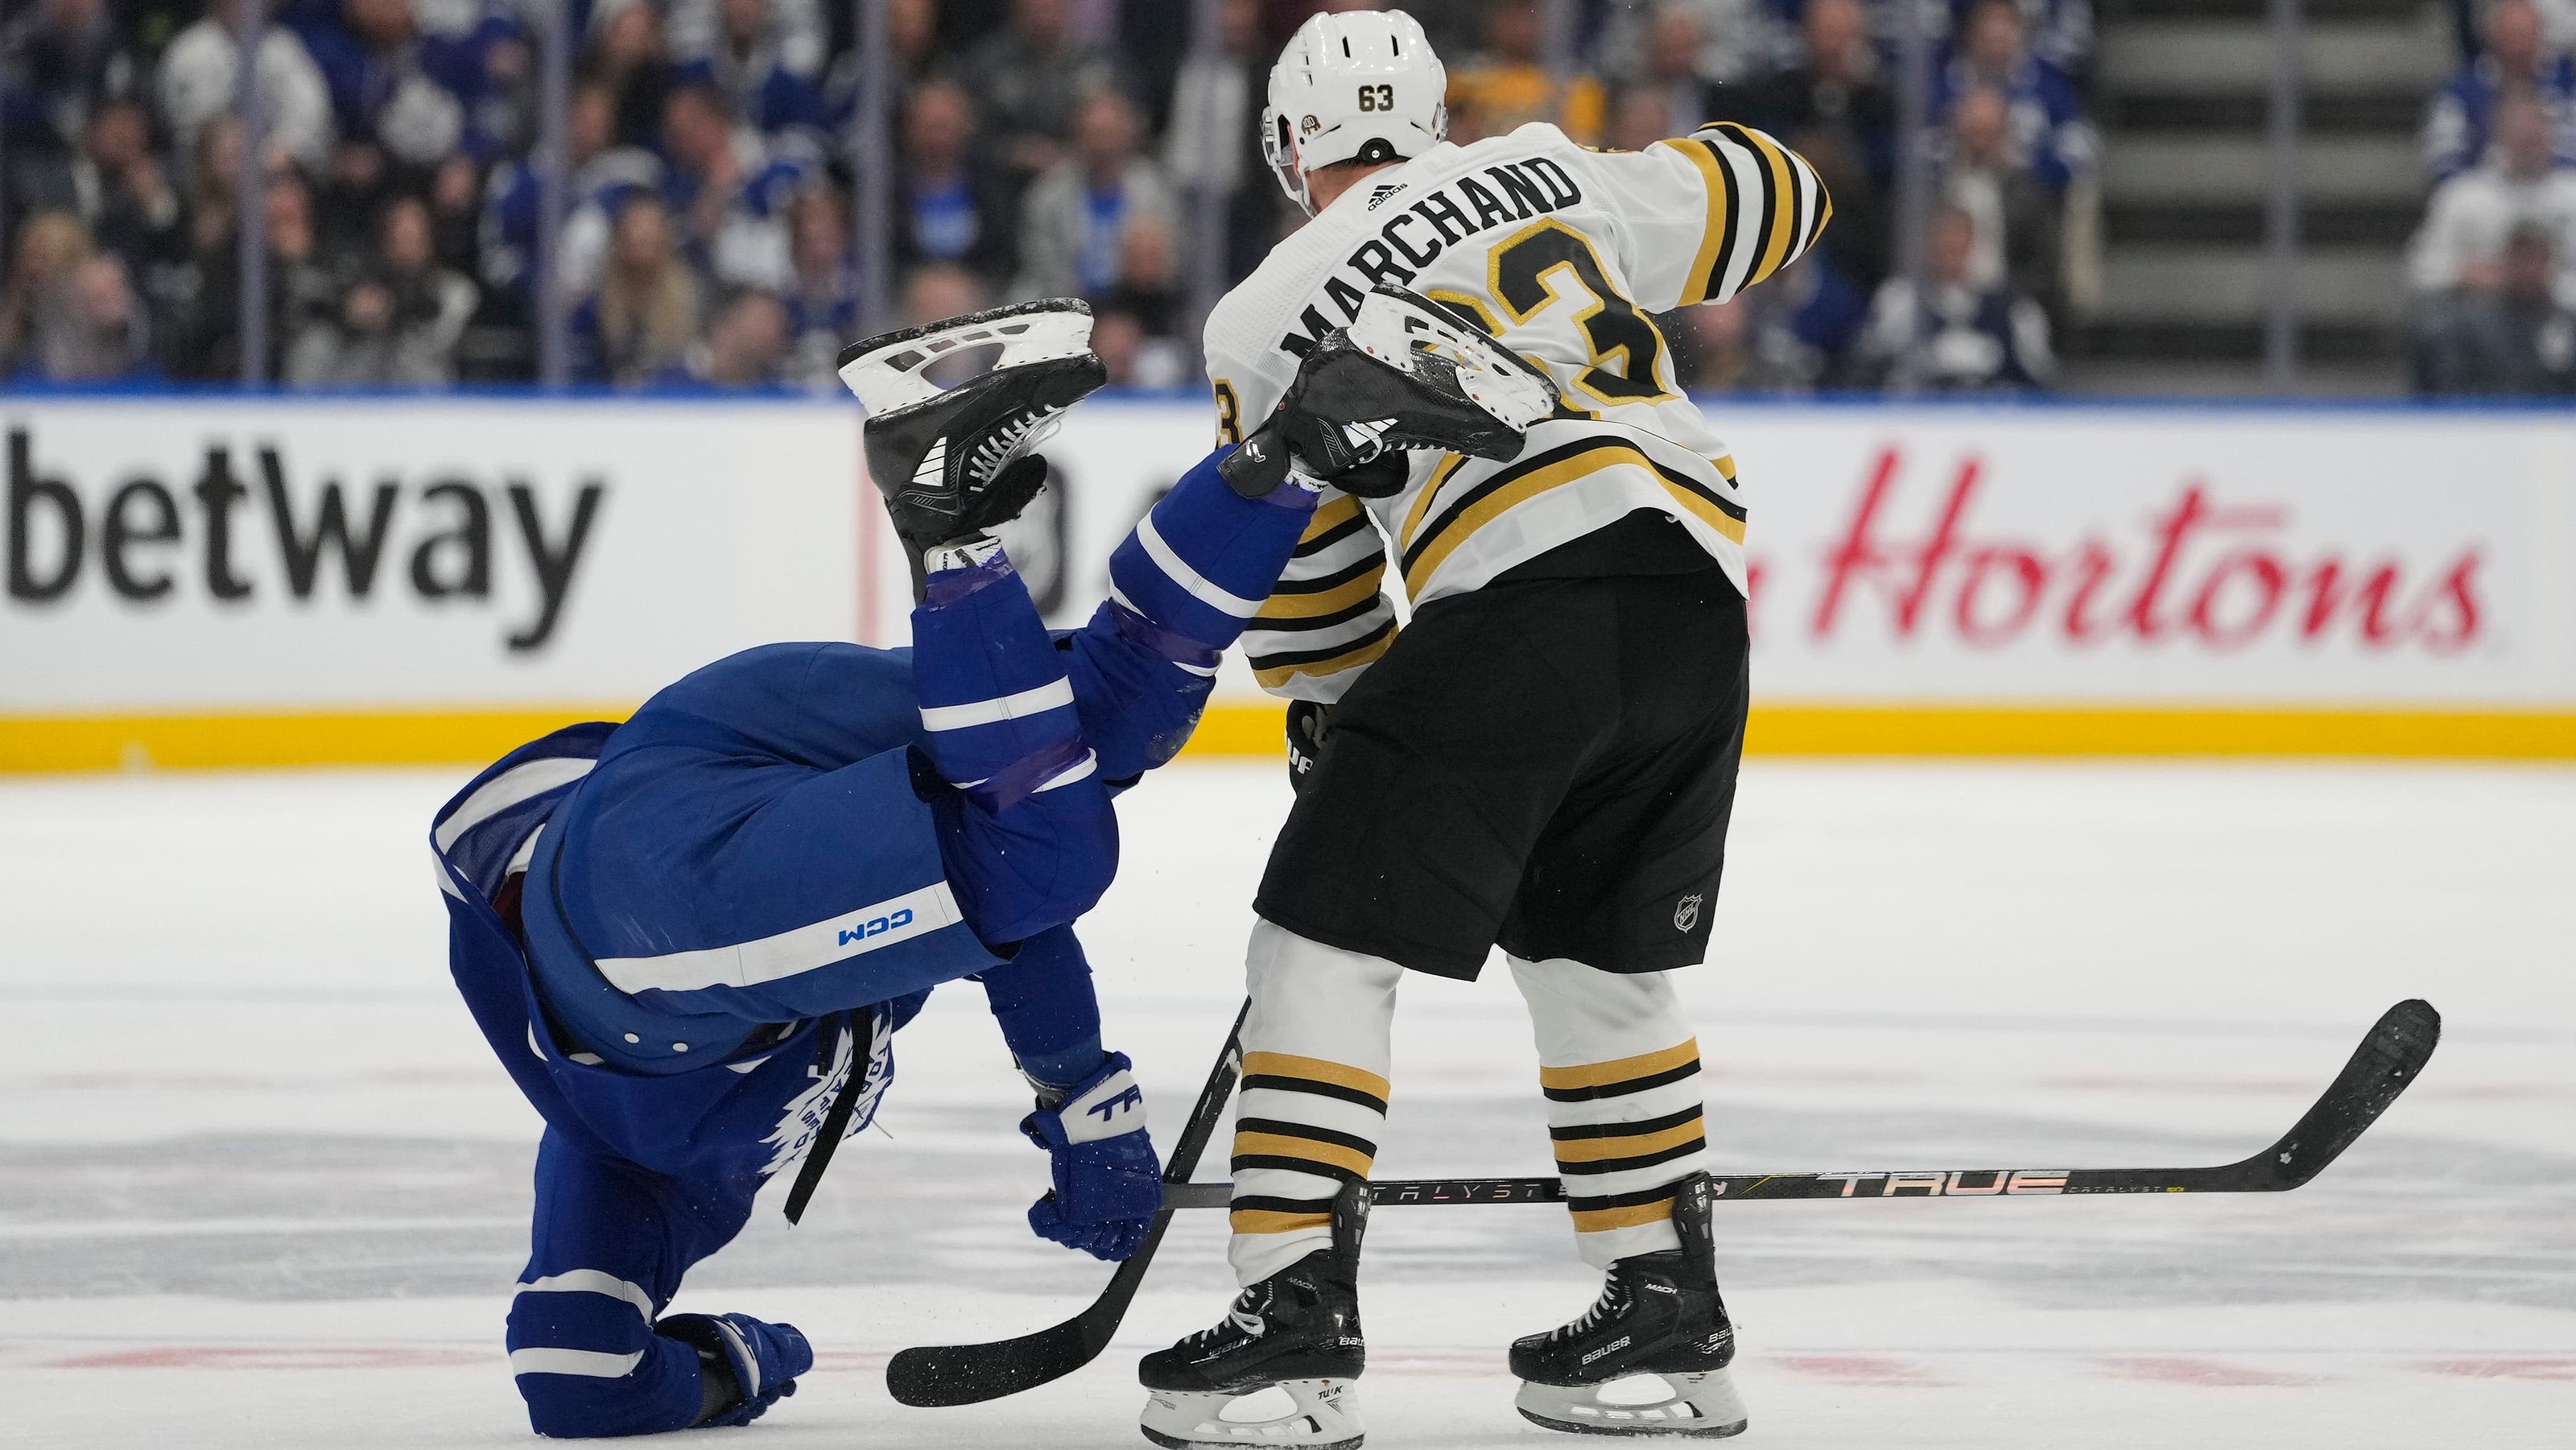 Maple Leafs' Sheldon Keefe: Bruins' Brad Marchand 'elite' at getting away with penalties